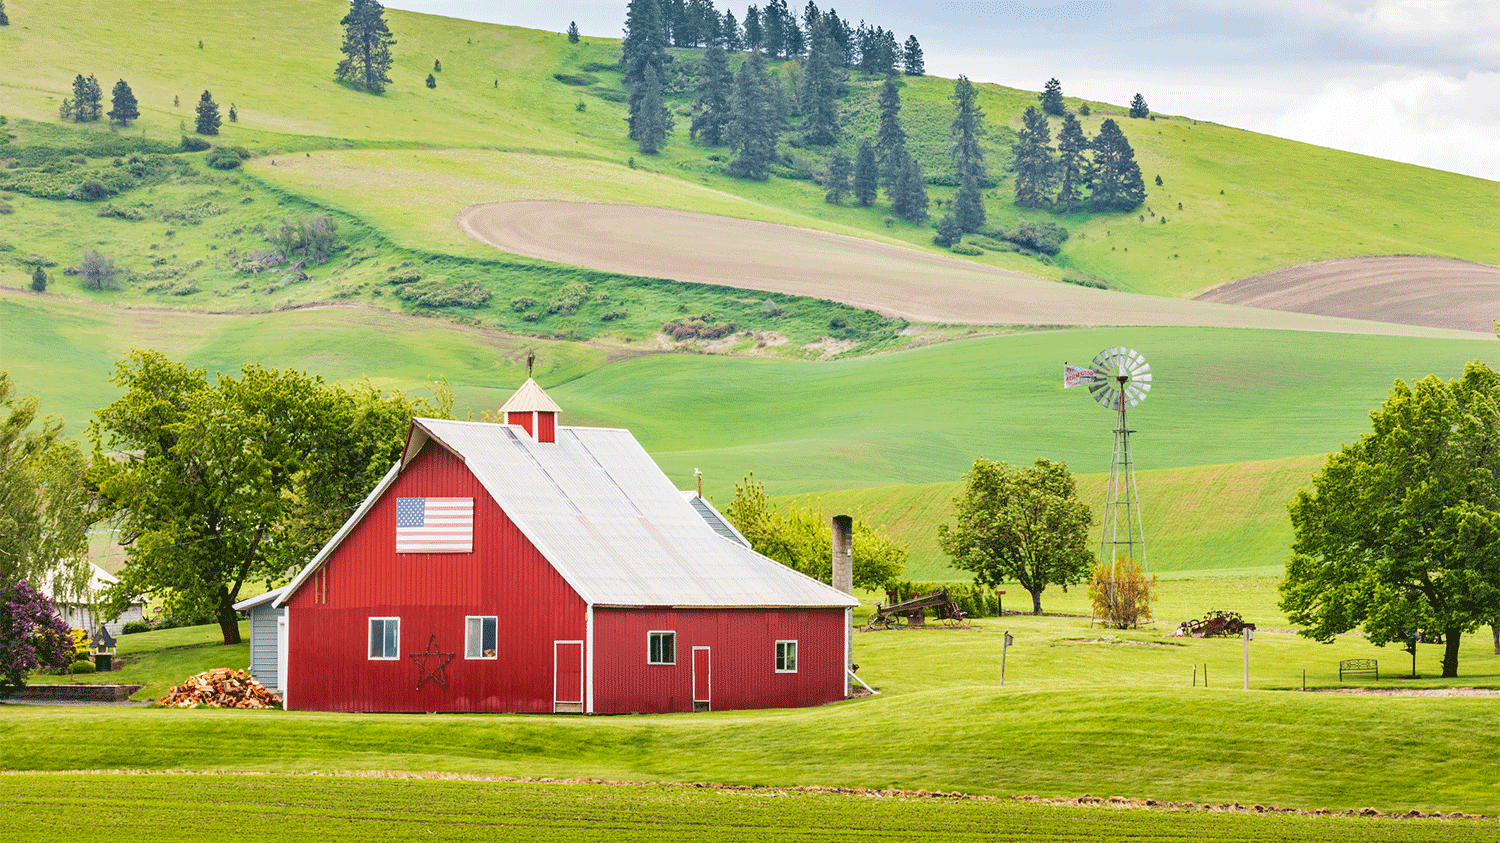 Red barn next to grassy hill